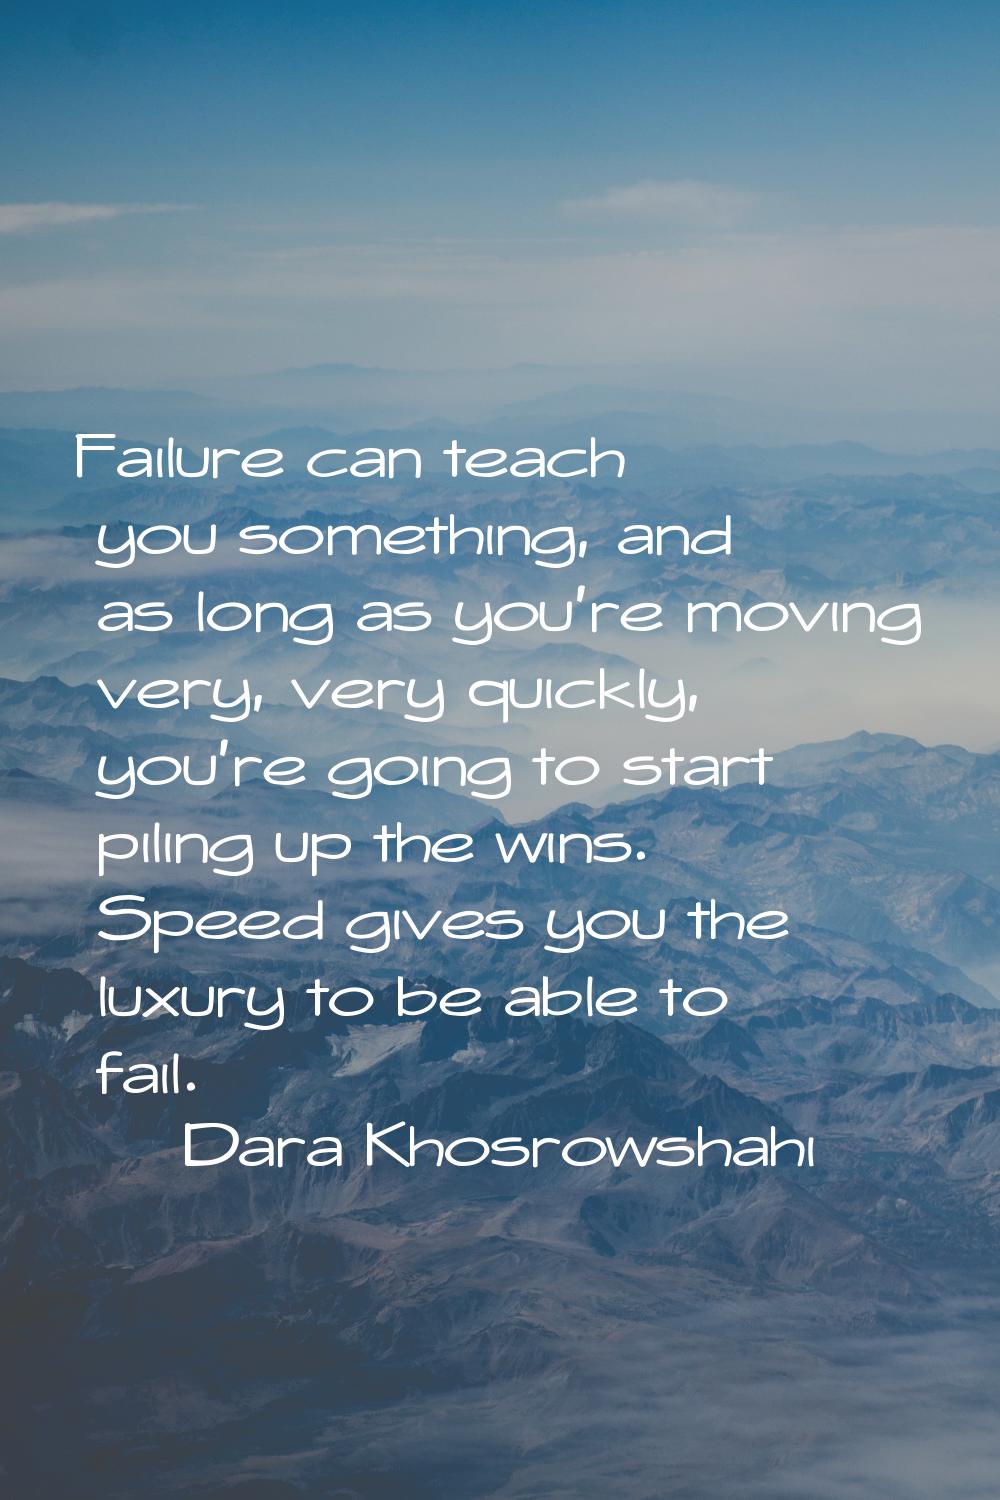 Failure can teach you something, and as long as you're moving very, very quickly, you're going to s